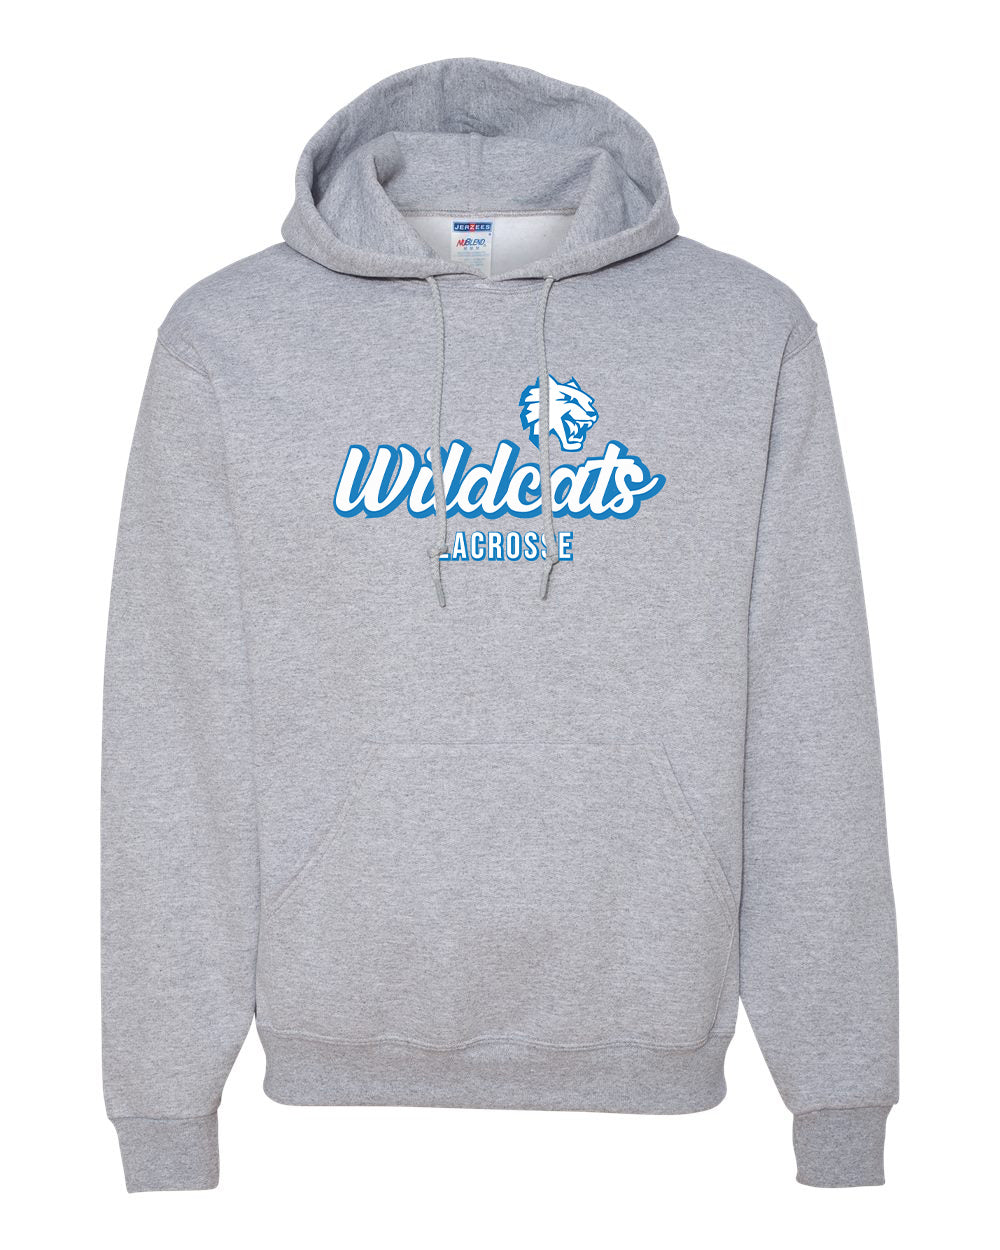 Suffield Youth Lacrosse - Adult Hoodie "Cursive" - 996MR (color options available)